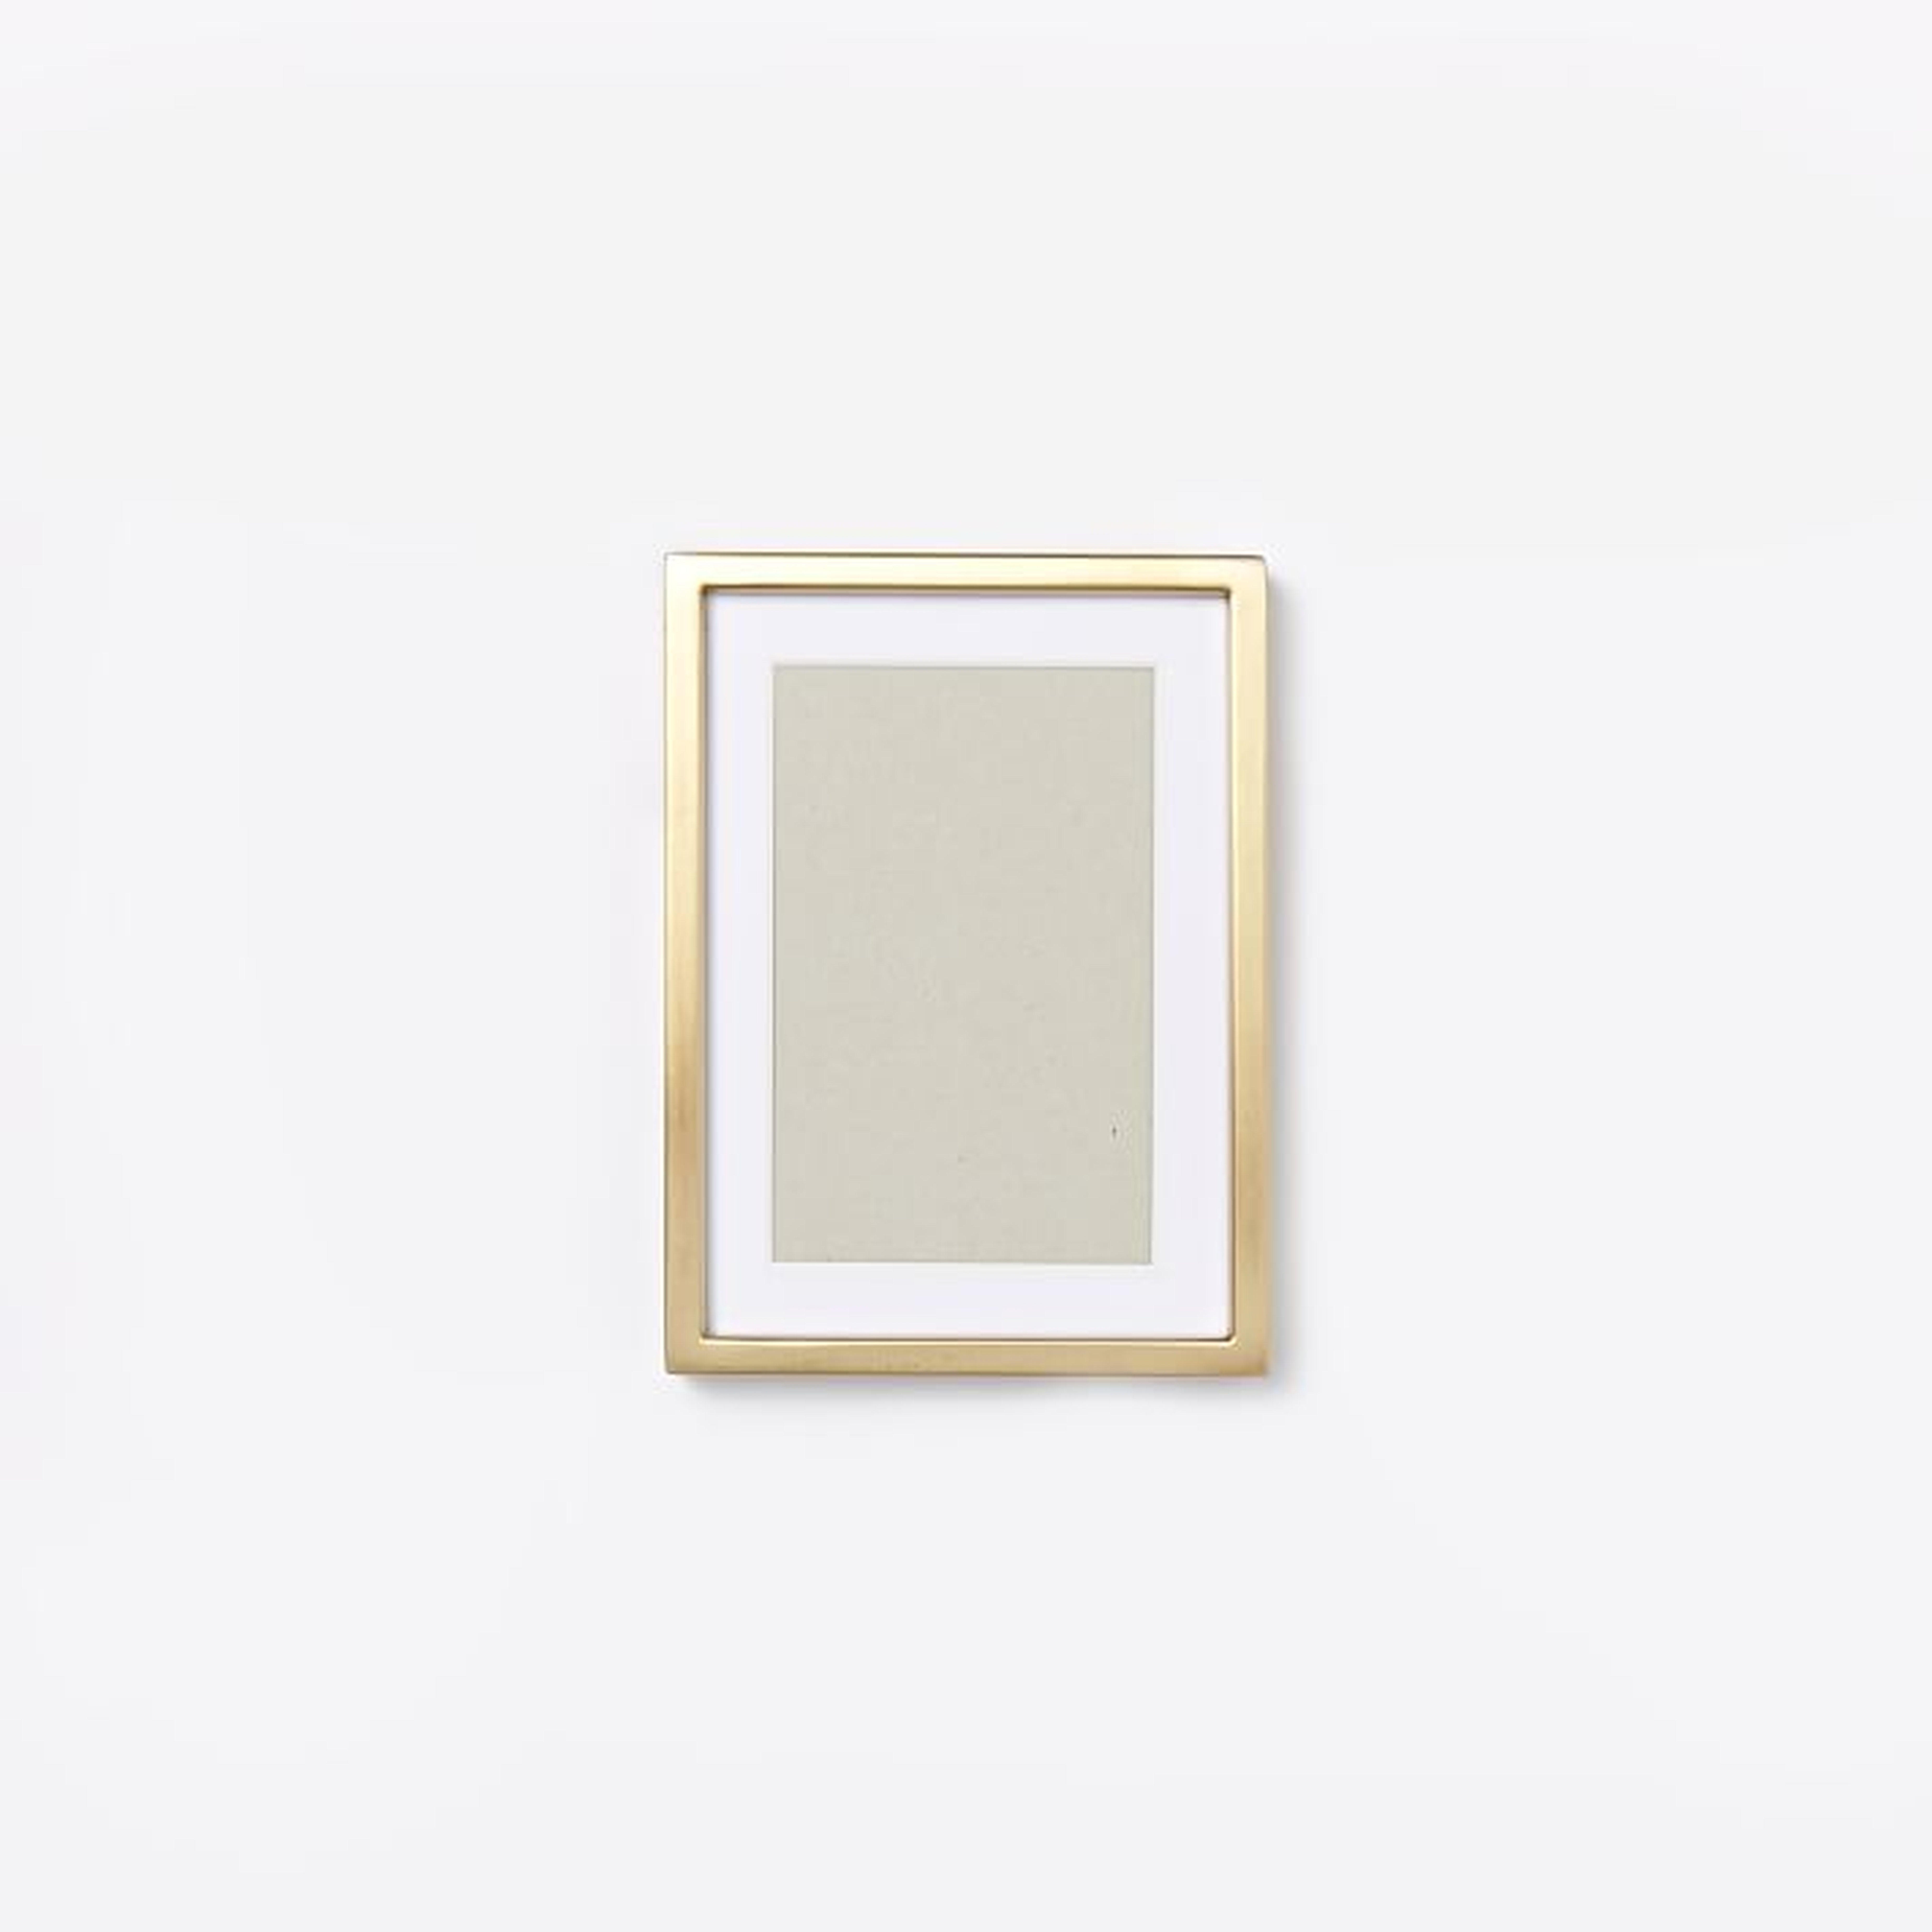 Metal Tabletop Frame -Brass - 4" x 6" (5" x 7" without mat) - West Elm